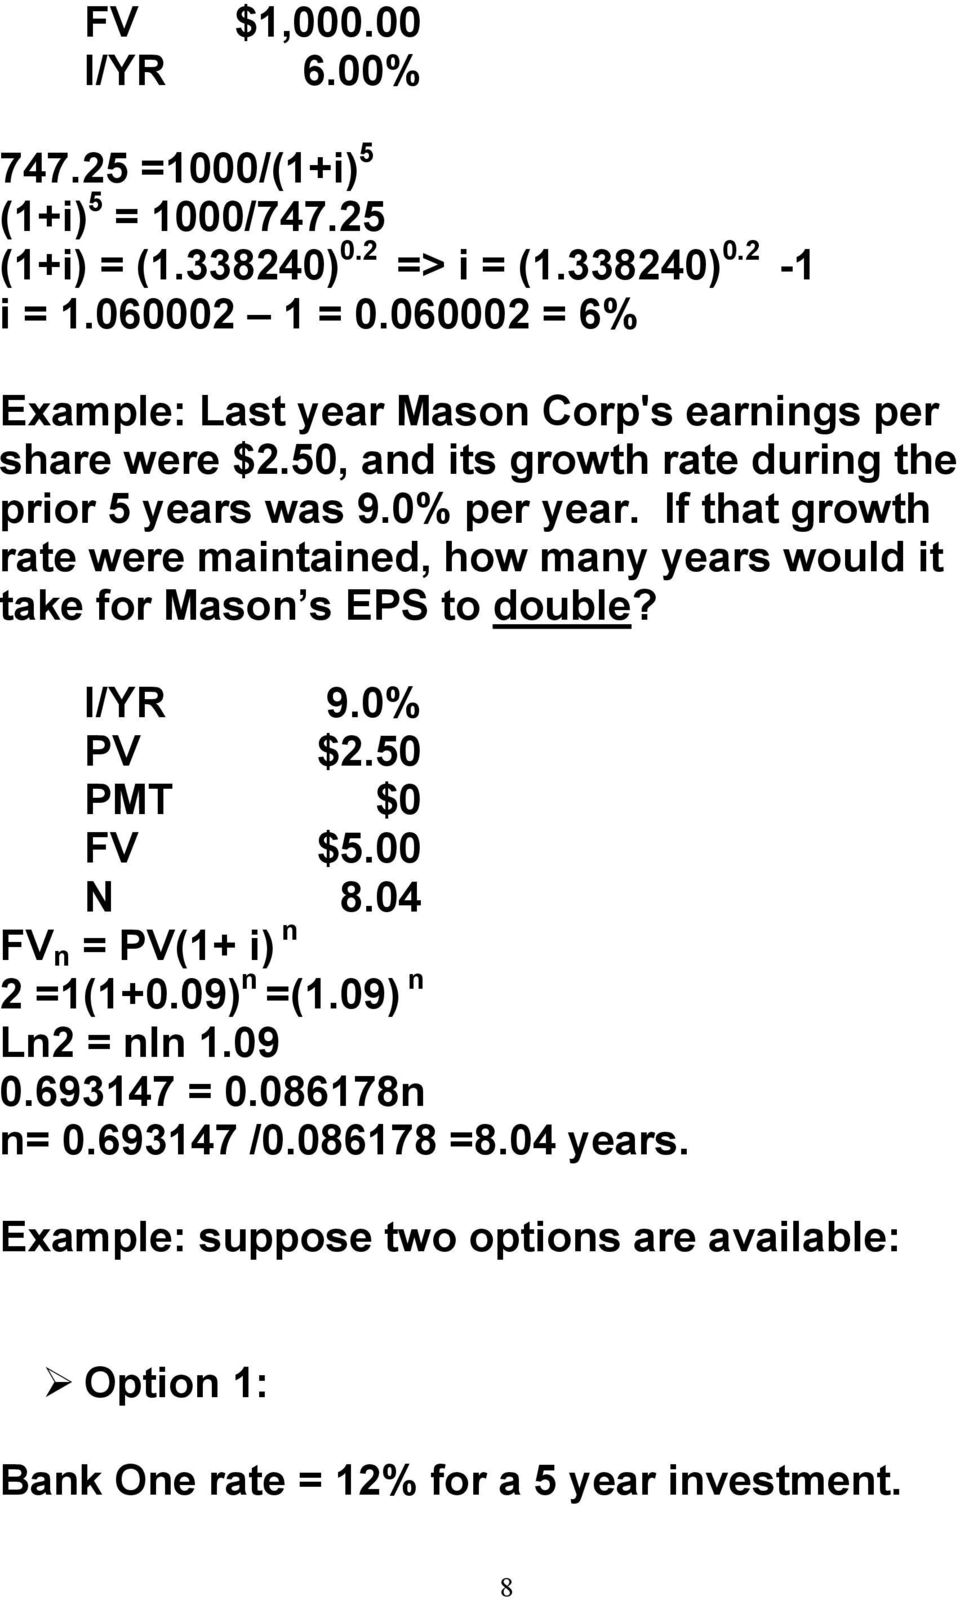 If that growth rate were mataed, how may years would t take for Maso s EPS to double? I/YR 9.0% PV $2.50 PMT $0 FV $5.00 N 8.